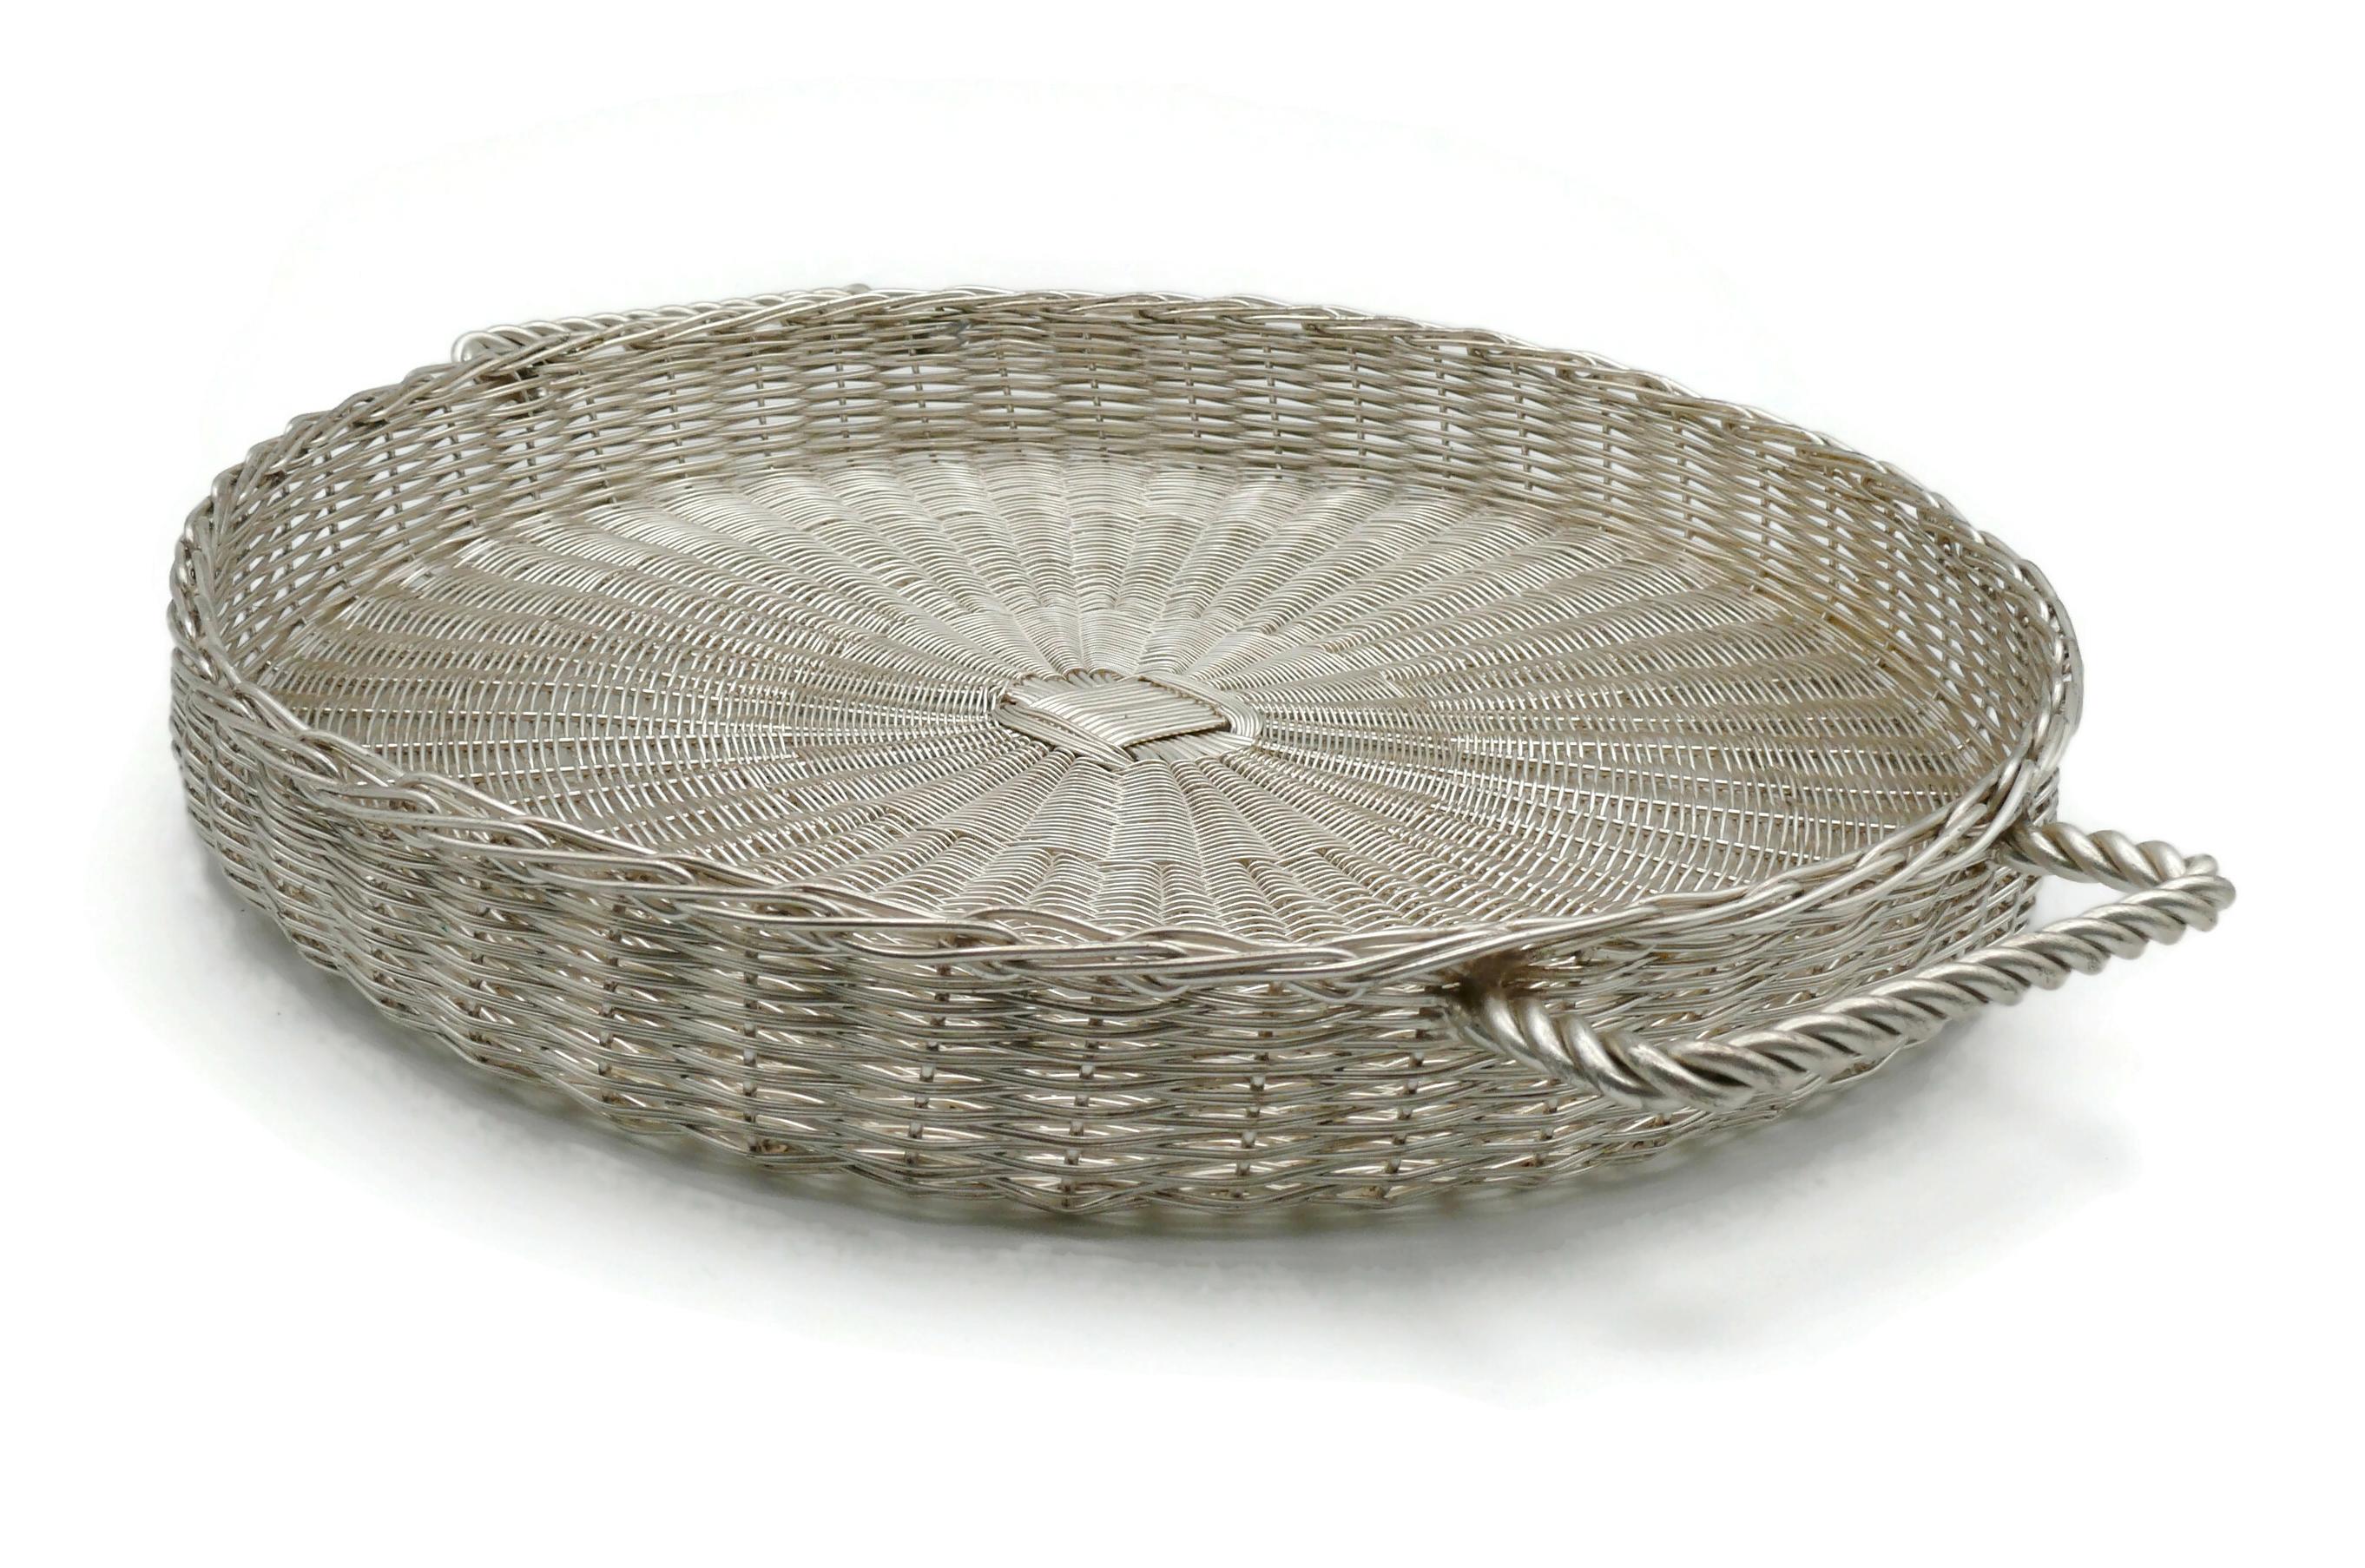 Women's or Men's CHRISTIAN DIOR Home Collection Vintage Silver Plated Wicker Style Basket For Sale